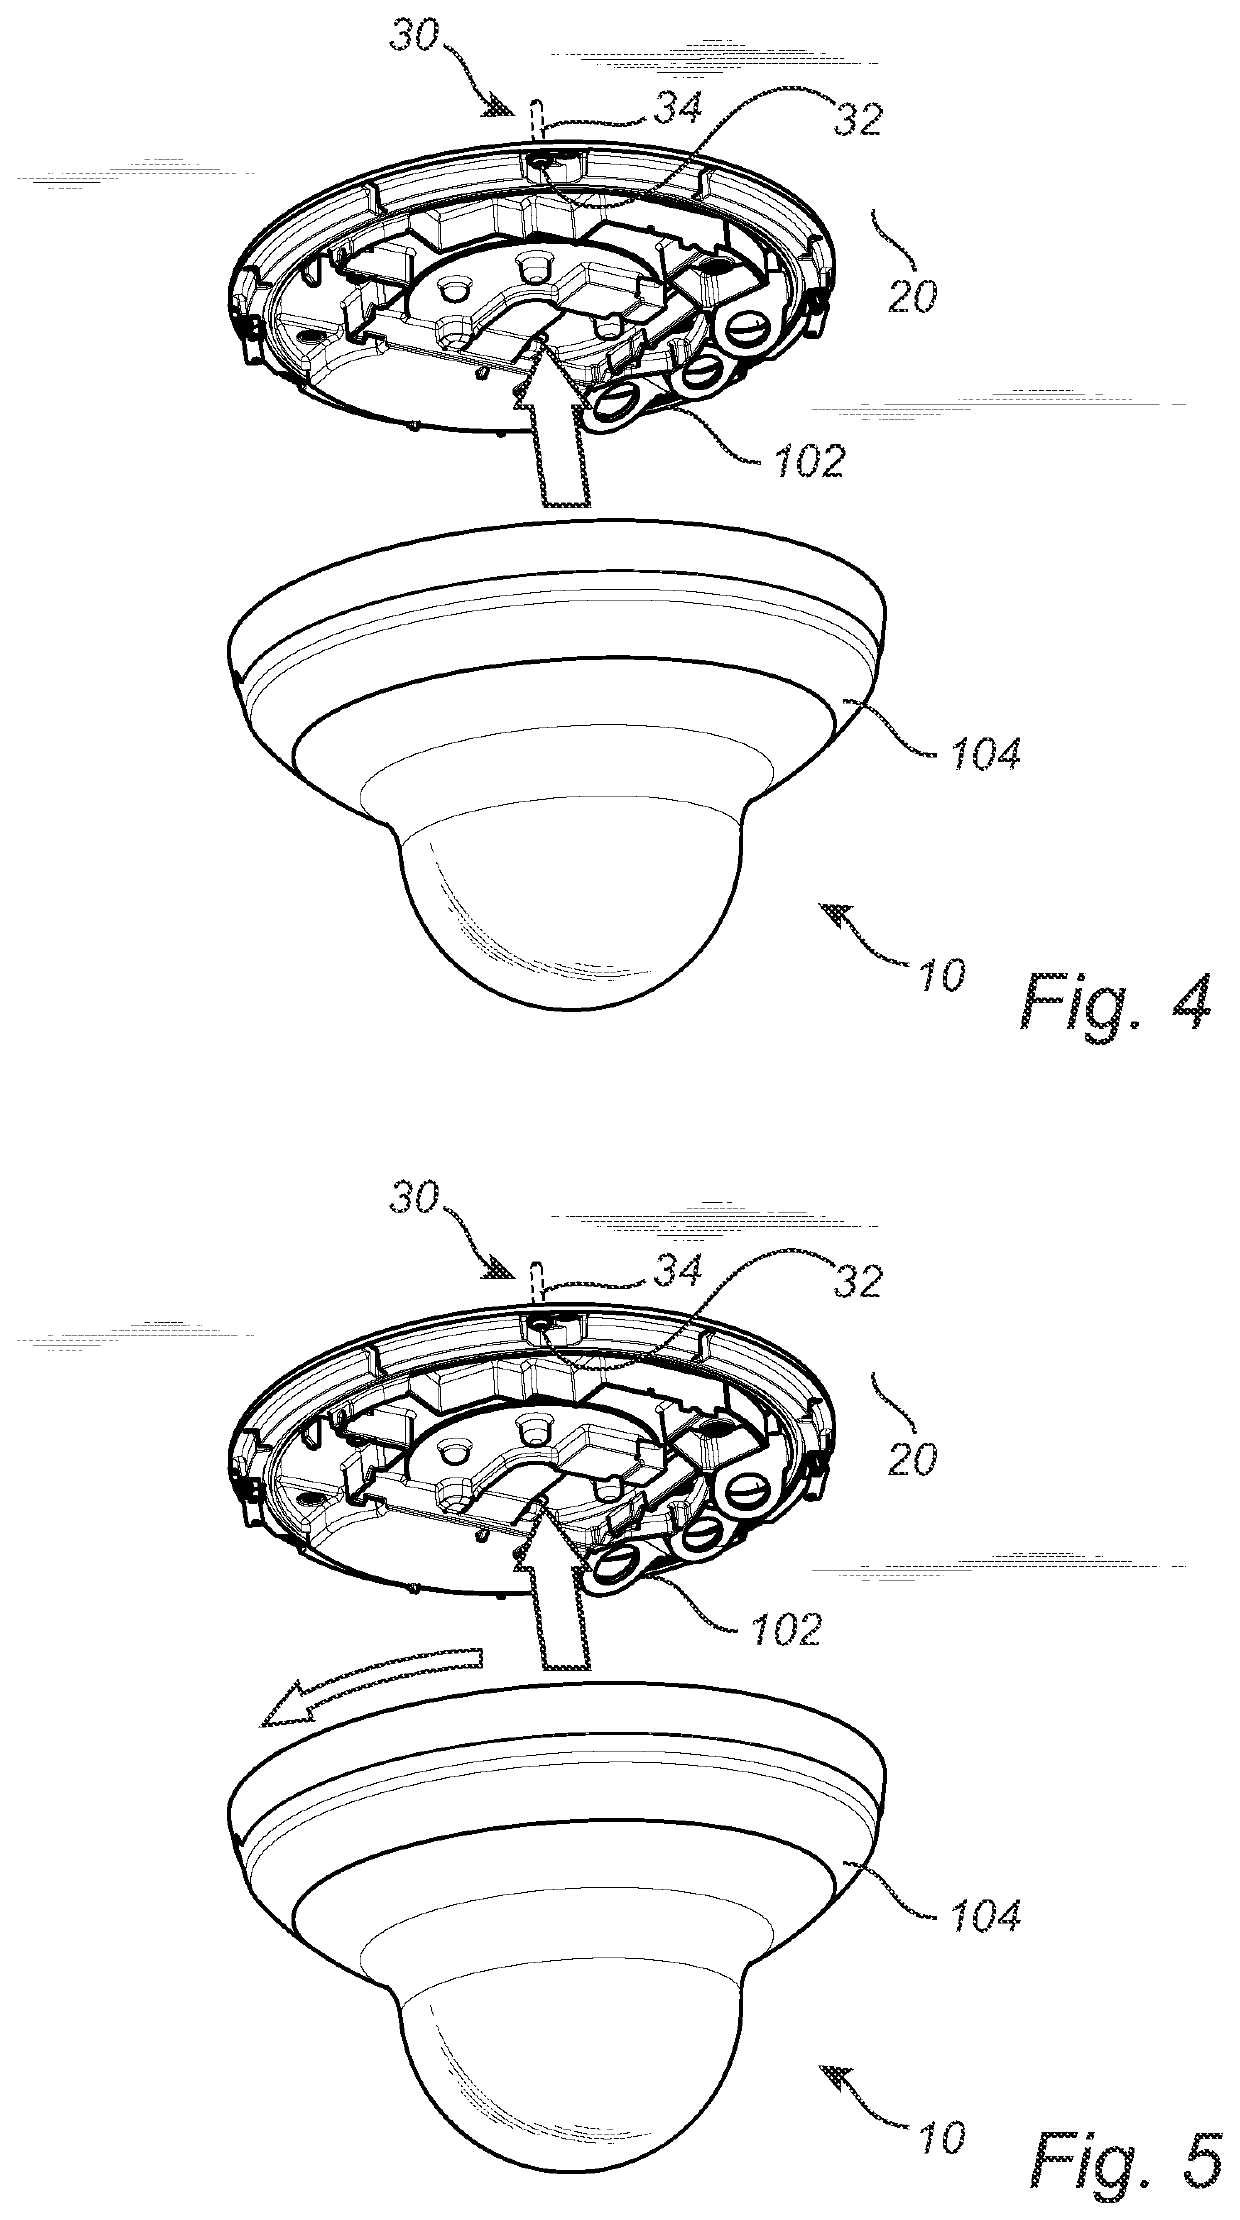 Device configured for mounting to a surface